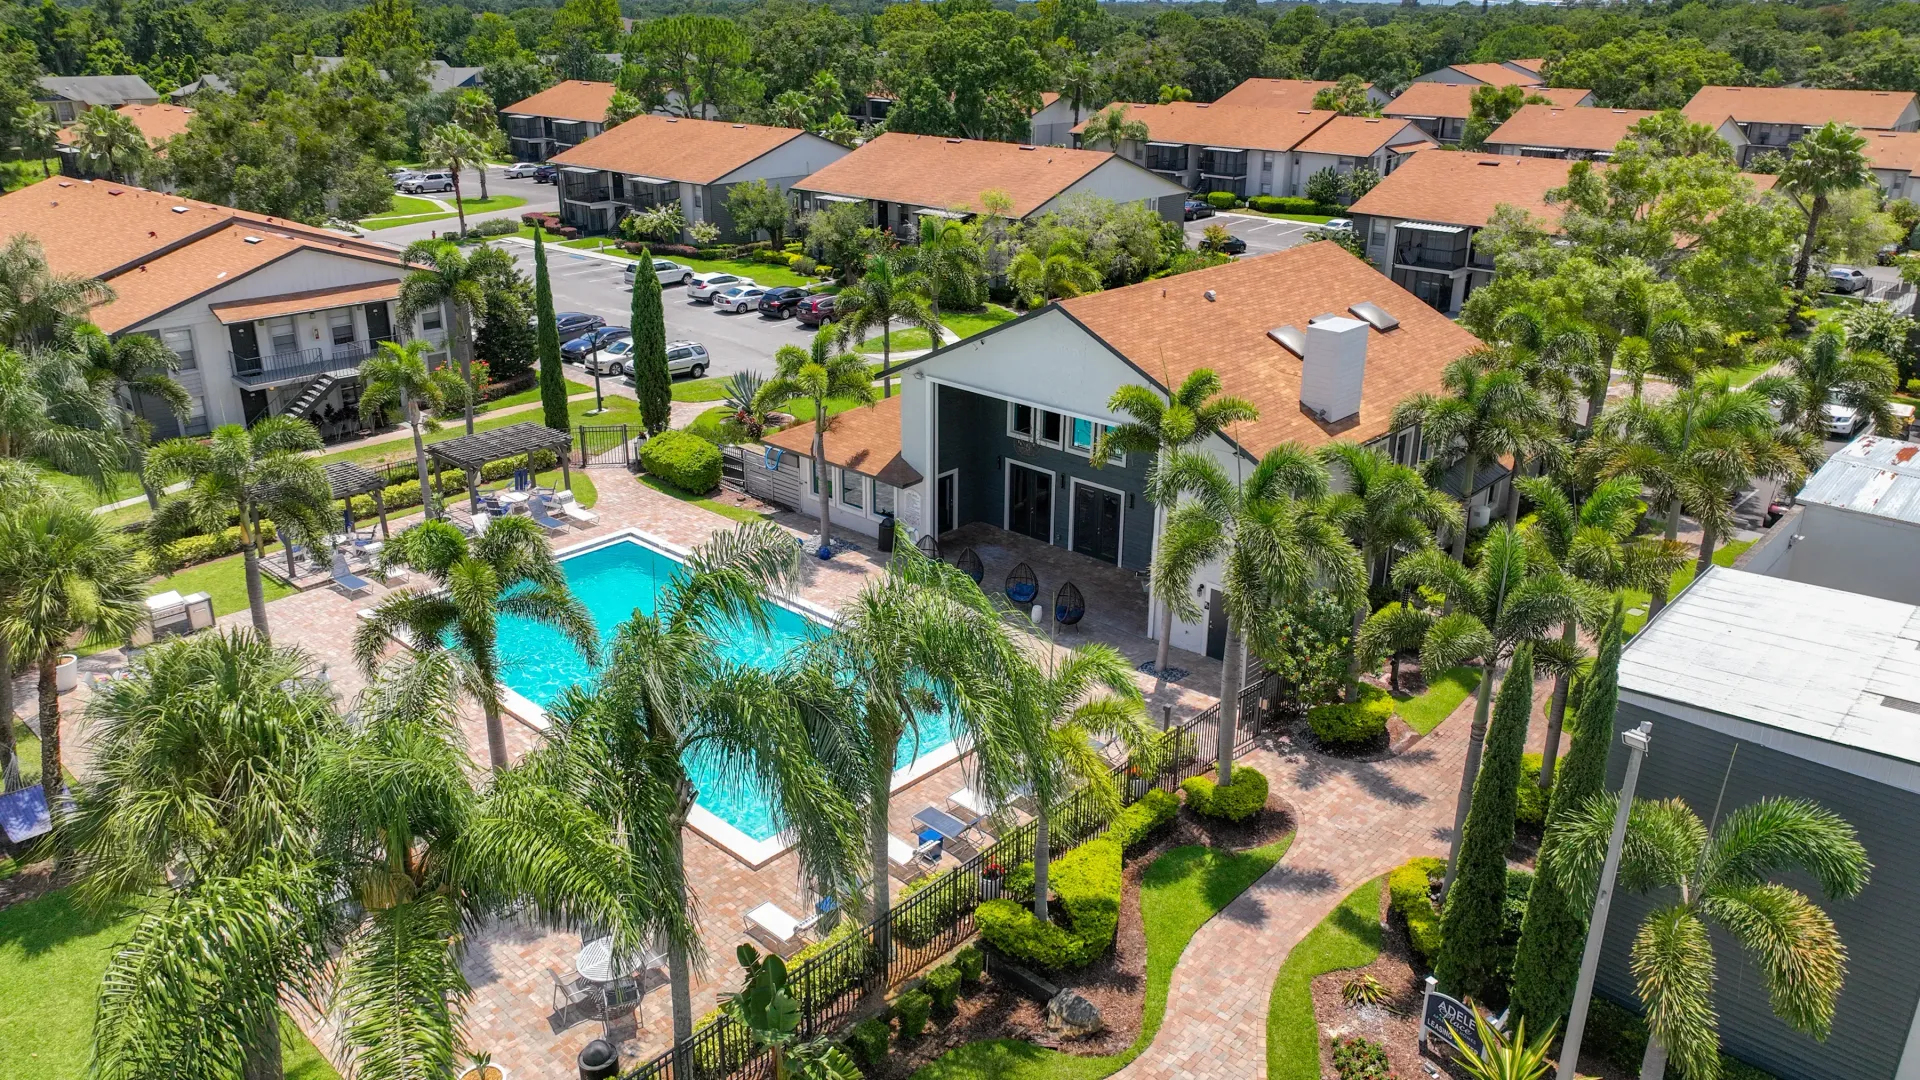 An aerial perspective of the apartment community, with the resort-style pool featured at the center.